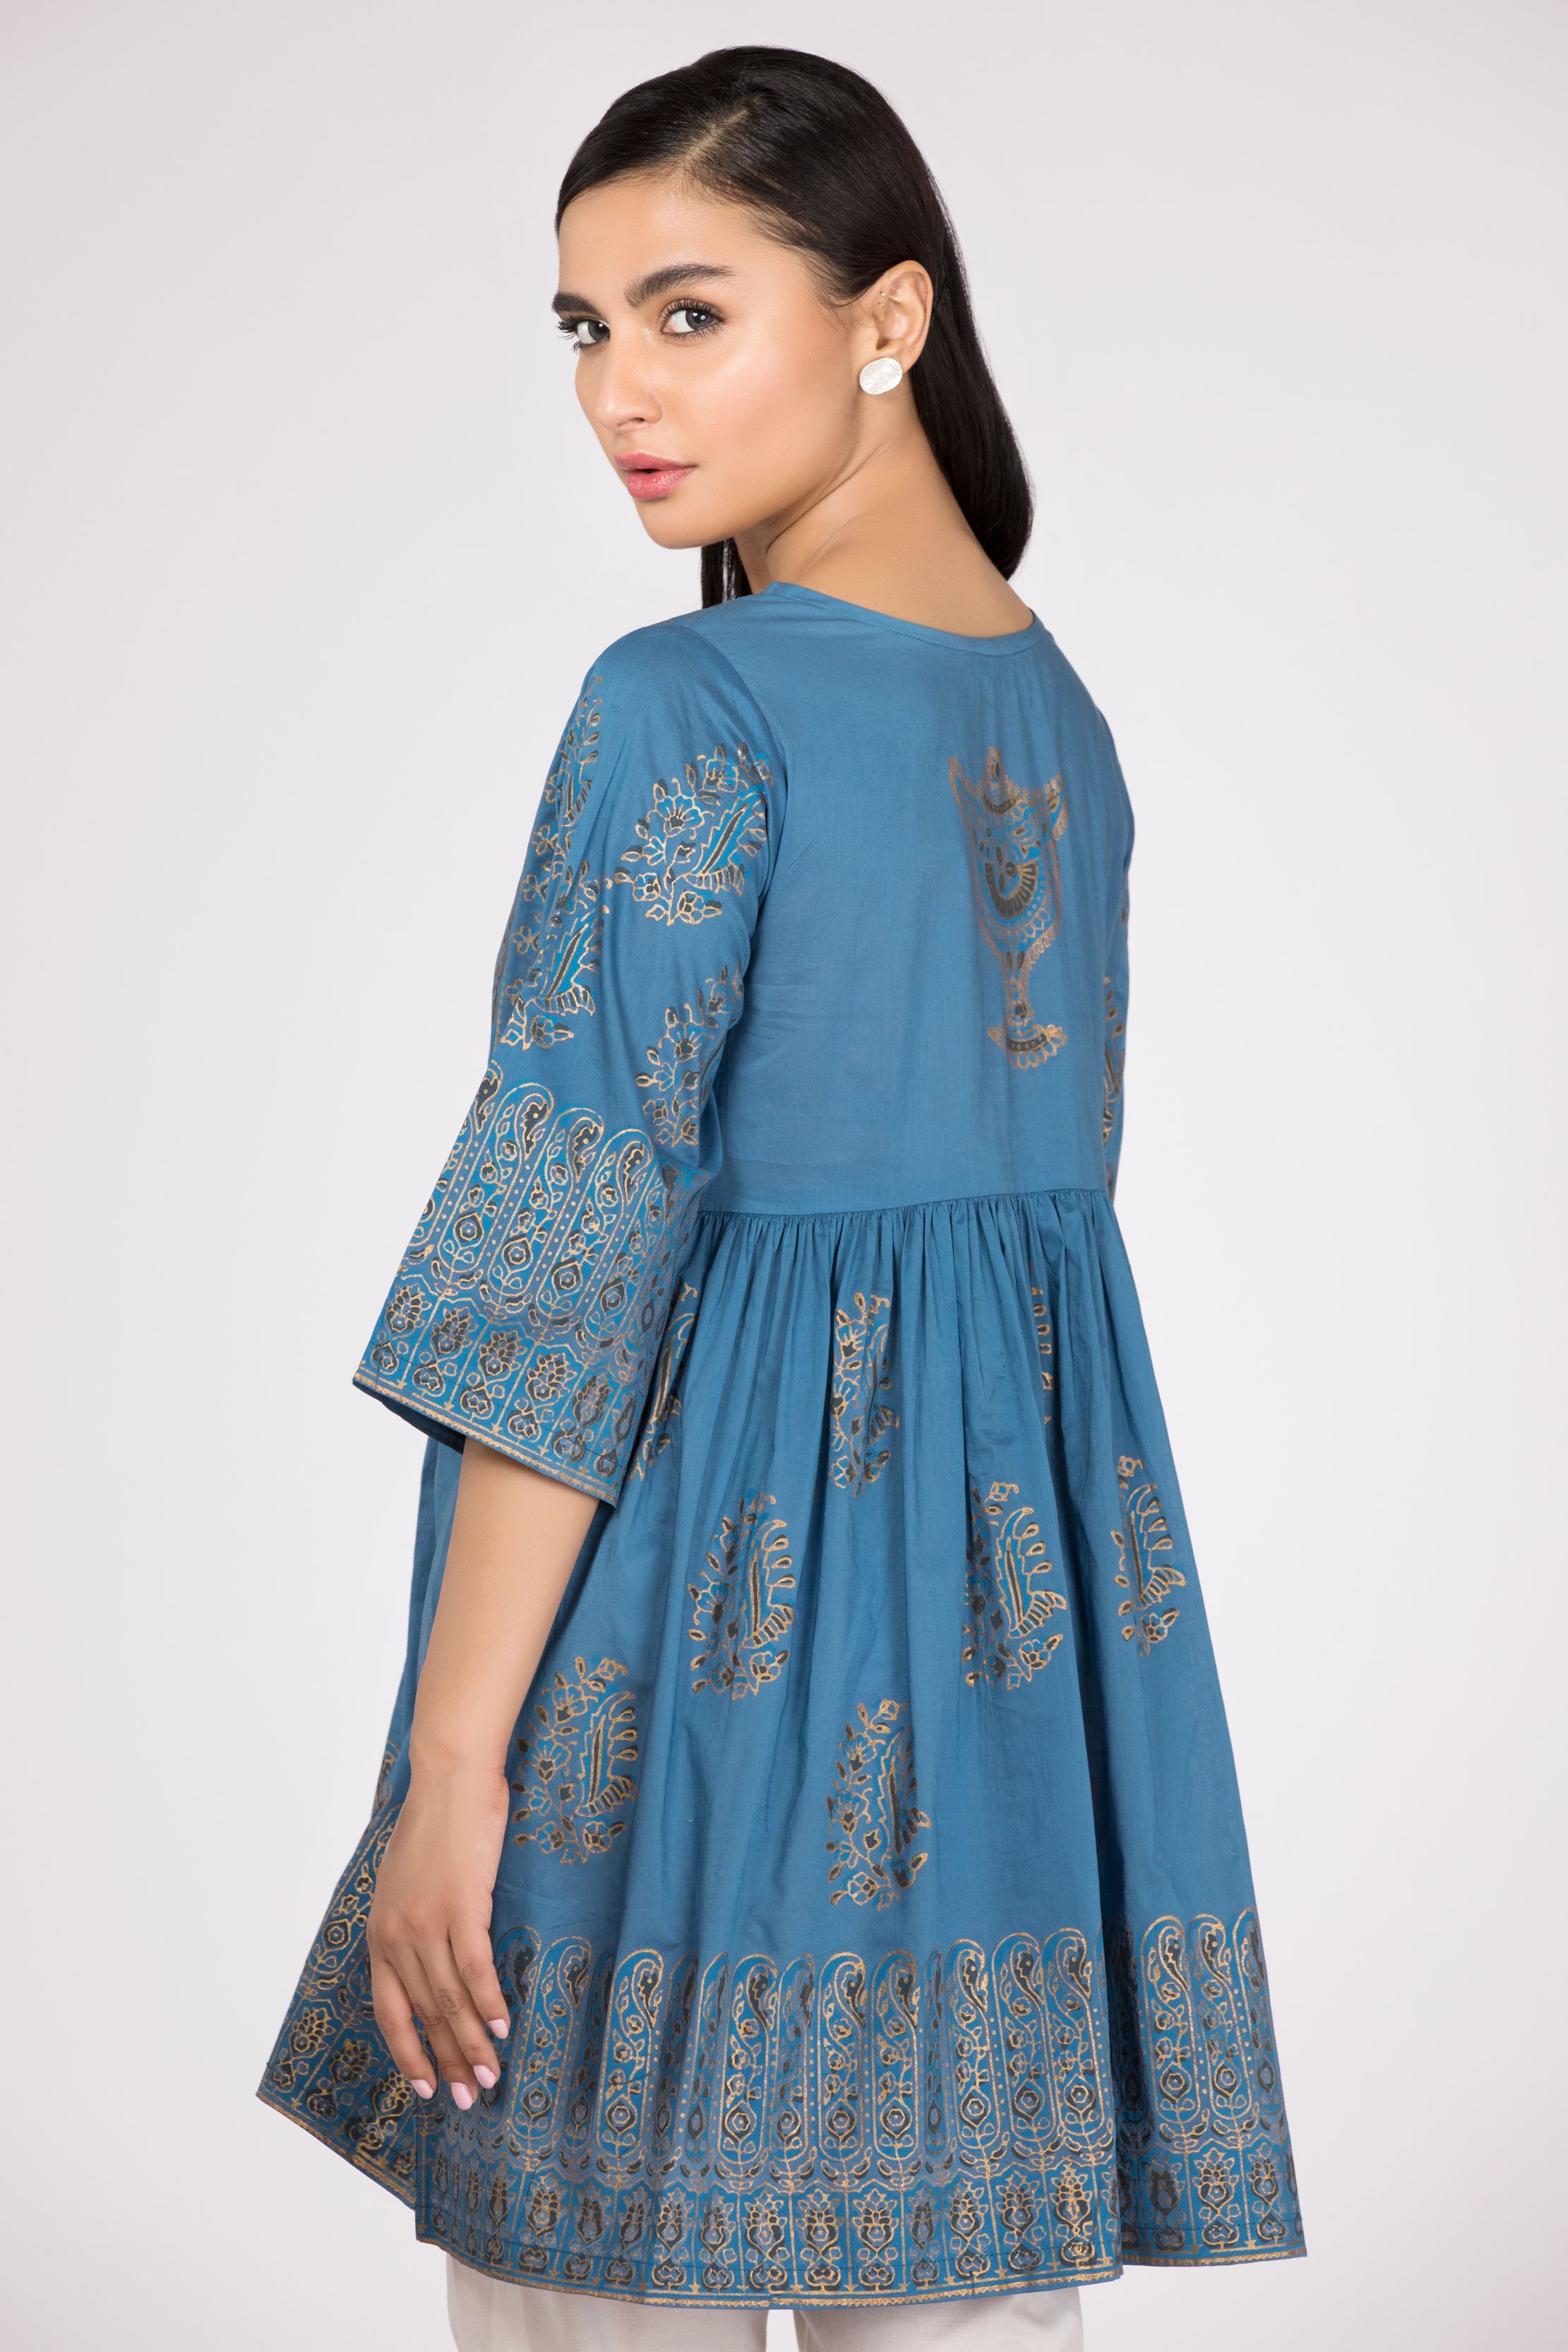 This pretty Pakistani dress in Dubai by Sapphire has a short frock